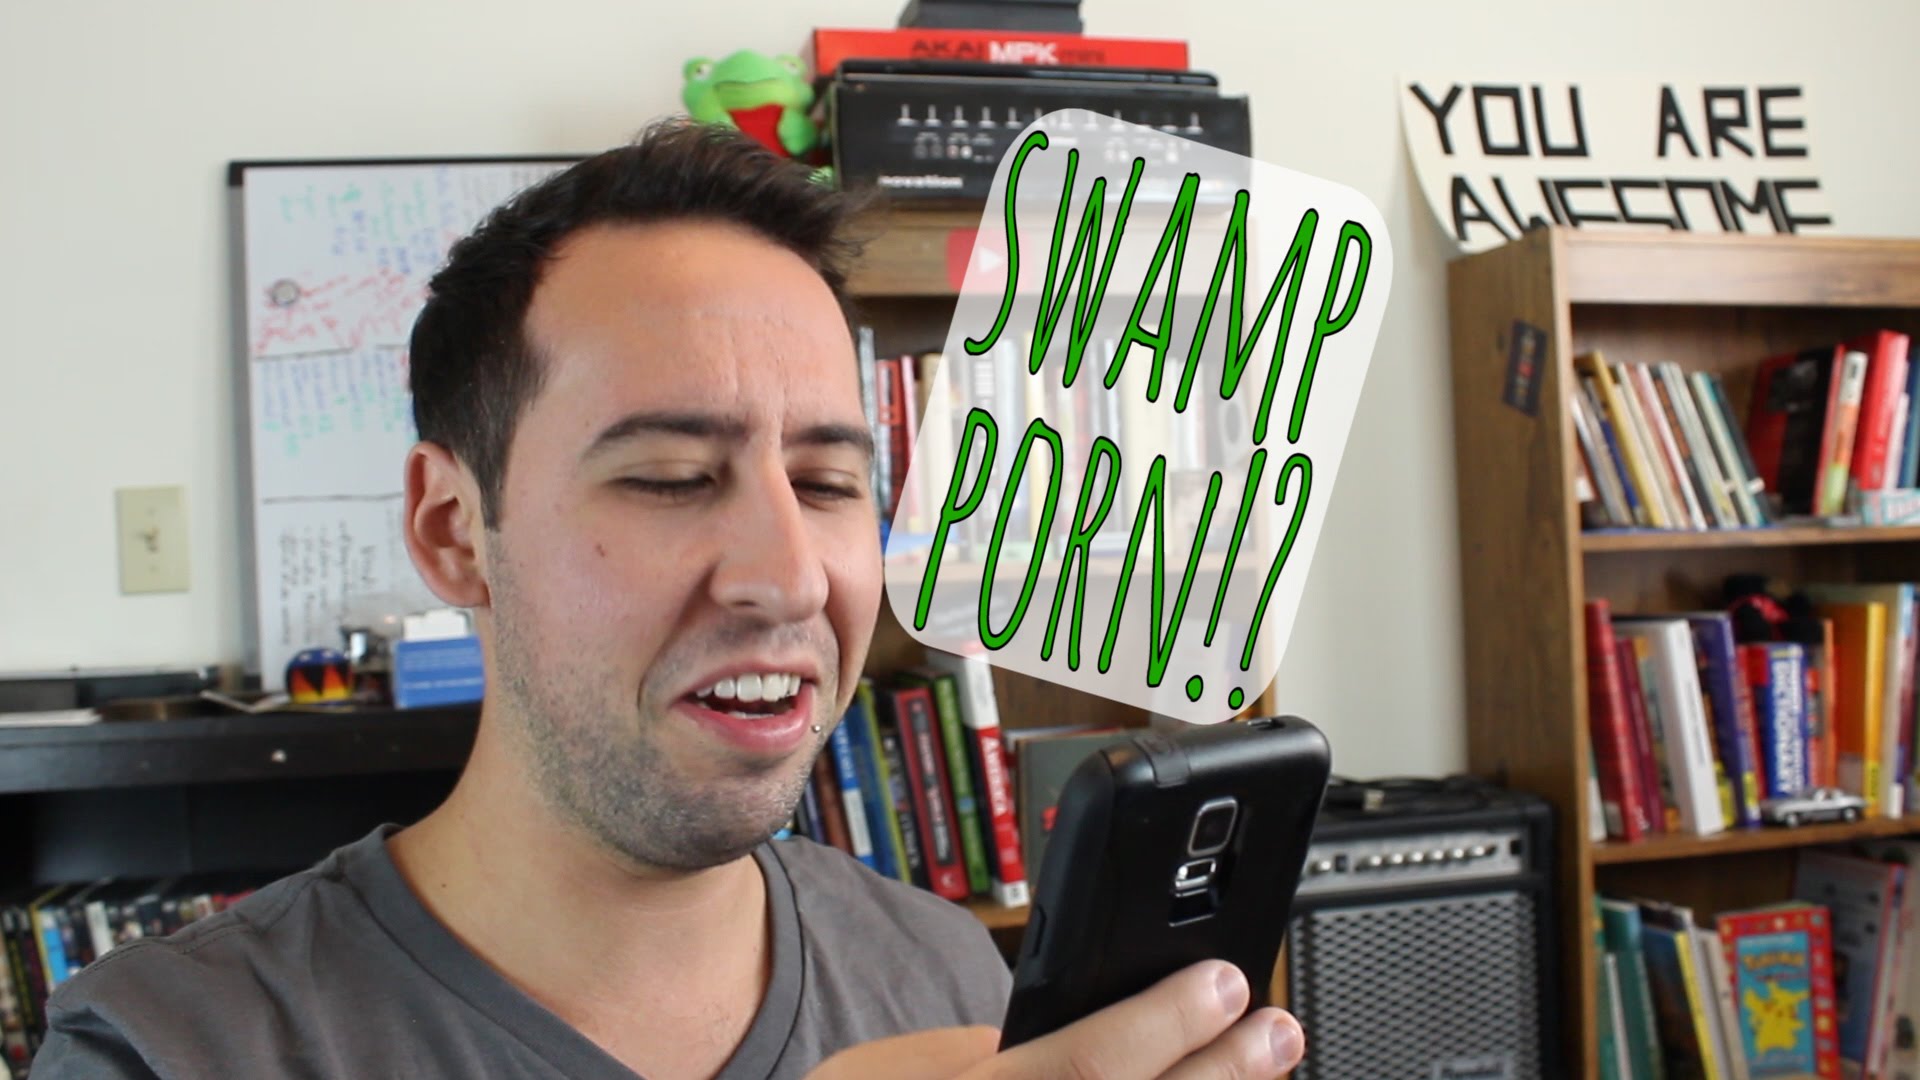 engagement party and swamp porn youtube